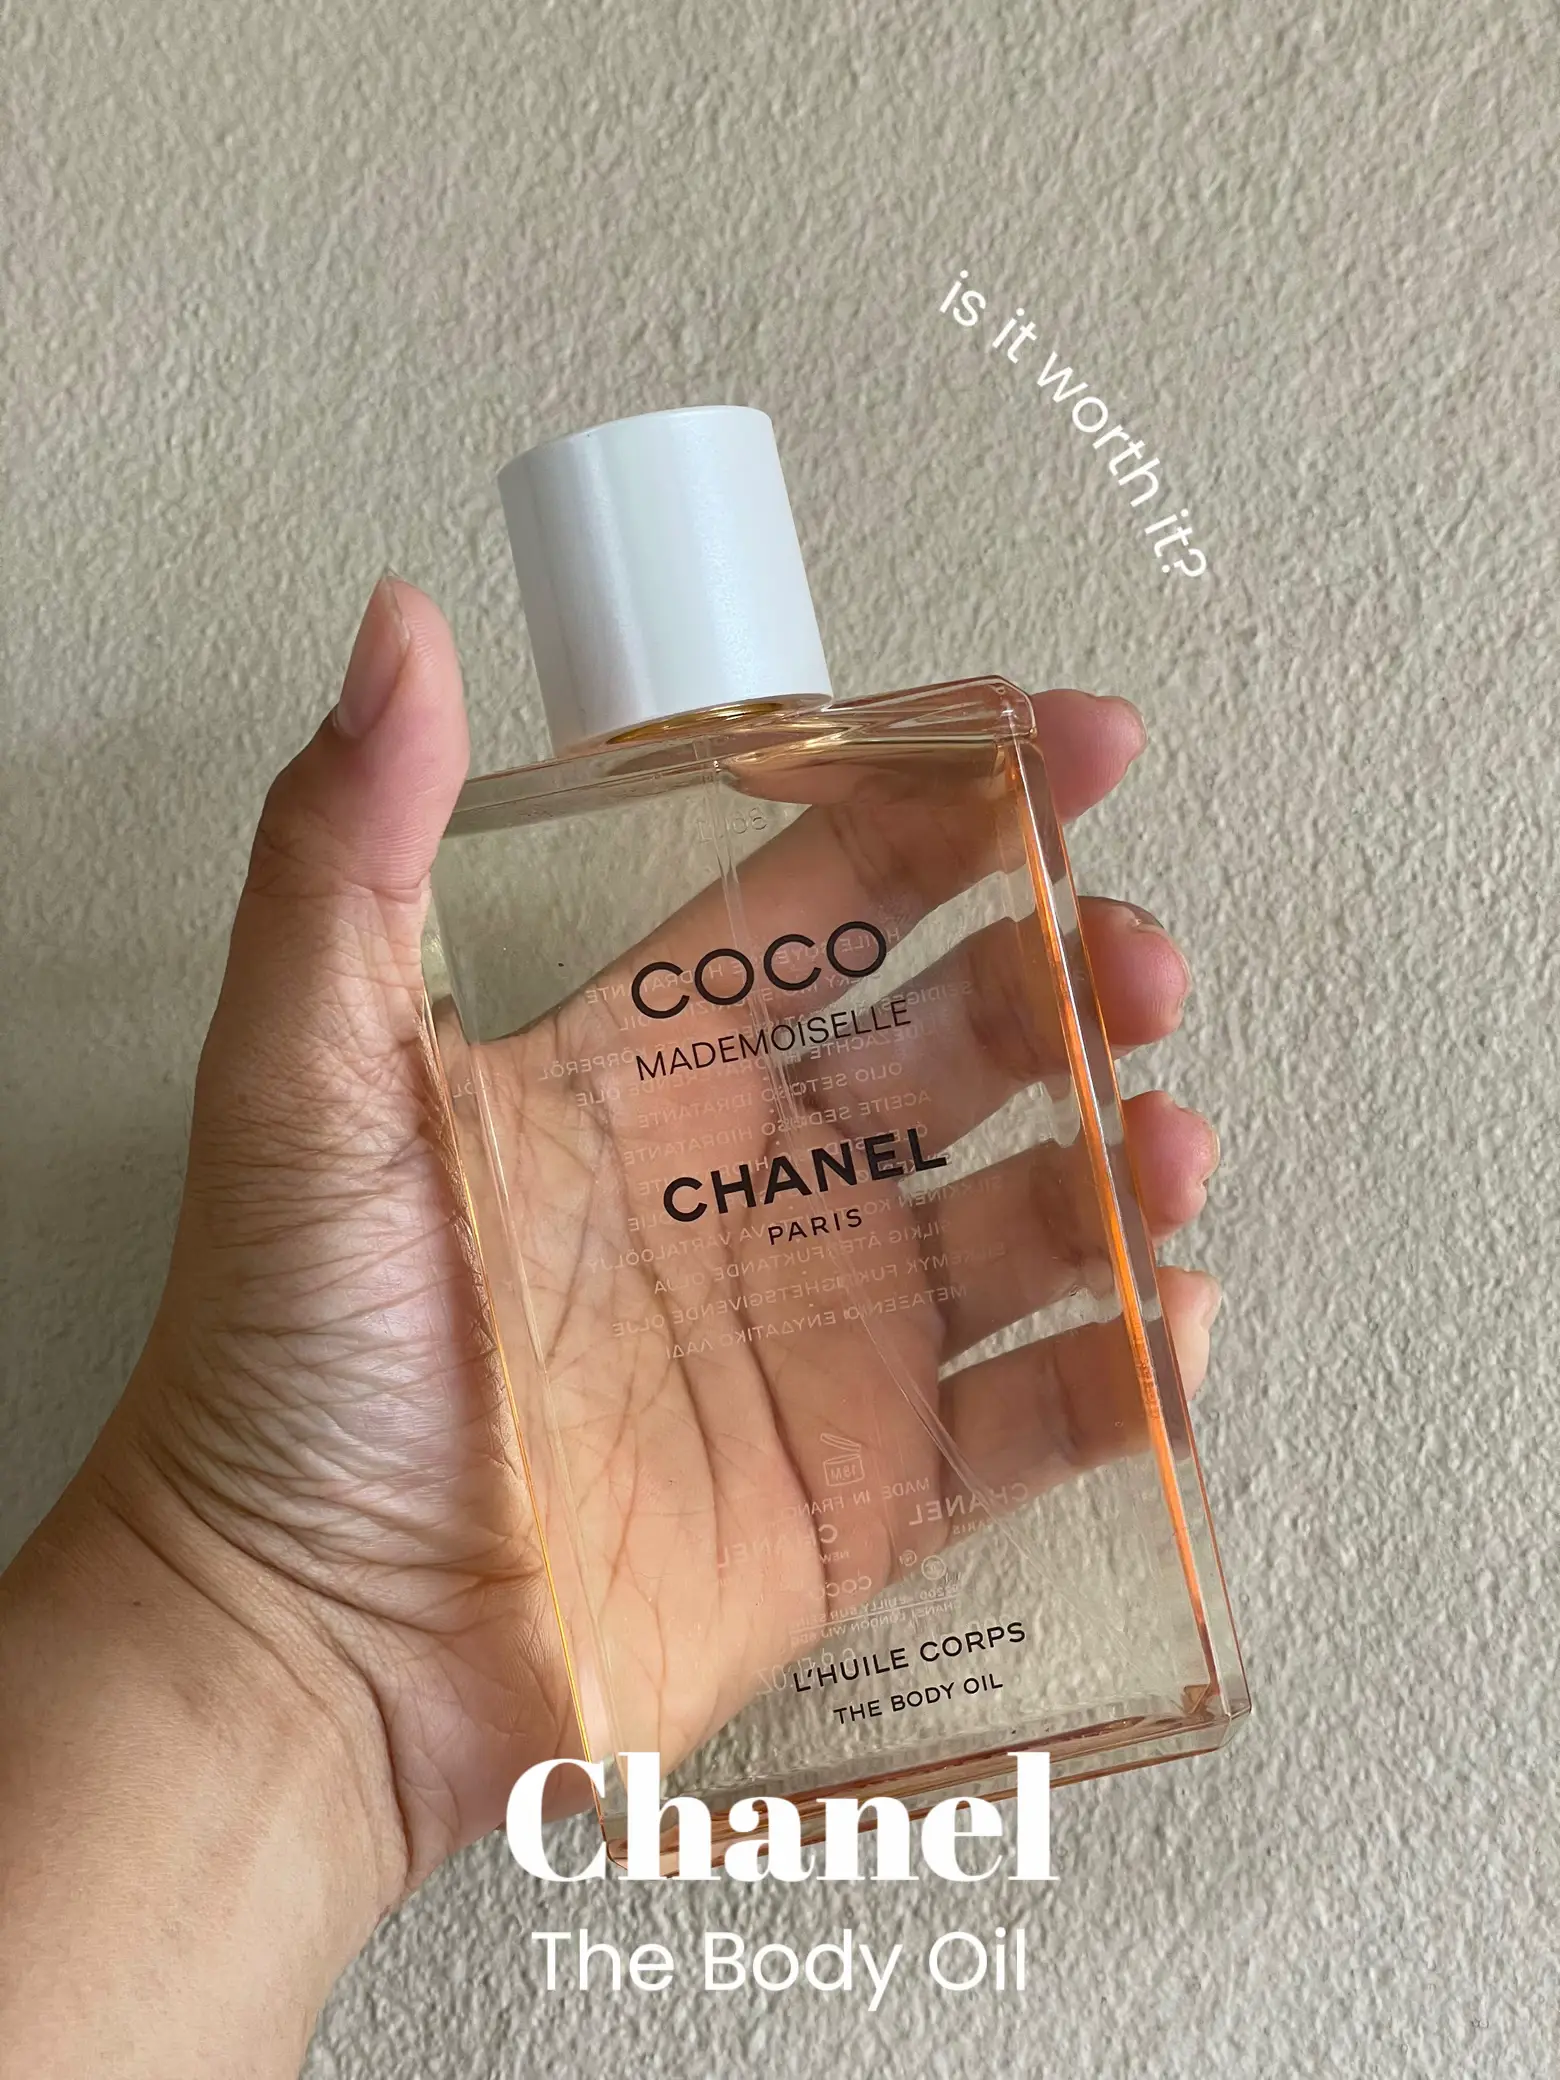 Chanel 22K Try Ons (& what I bought!)✨, Gallery posted by etherealpeonies